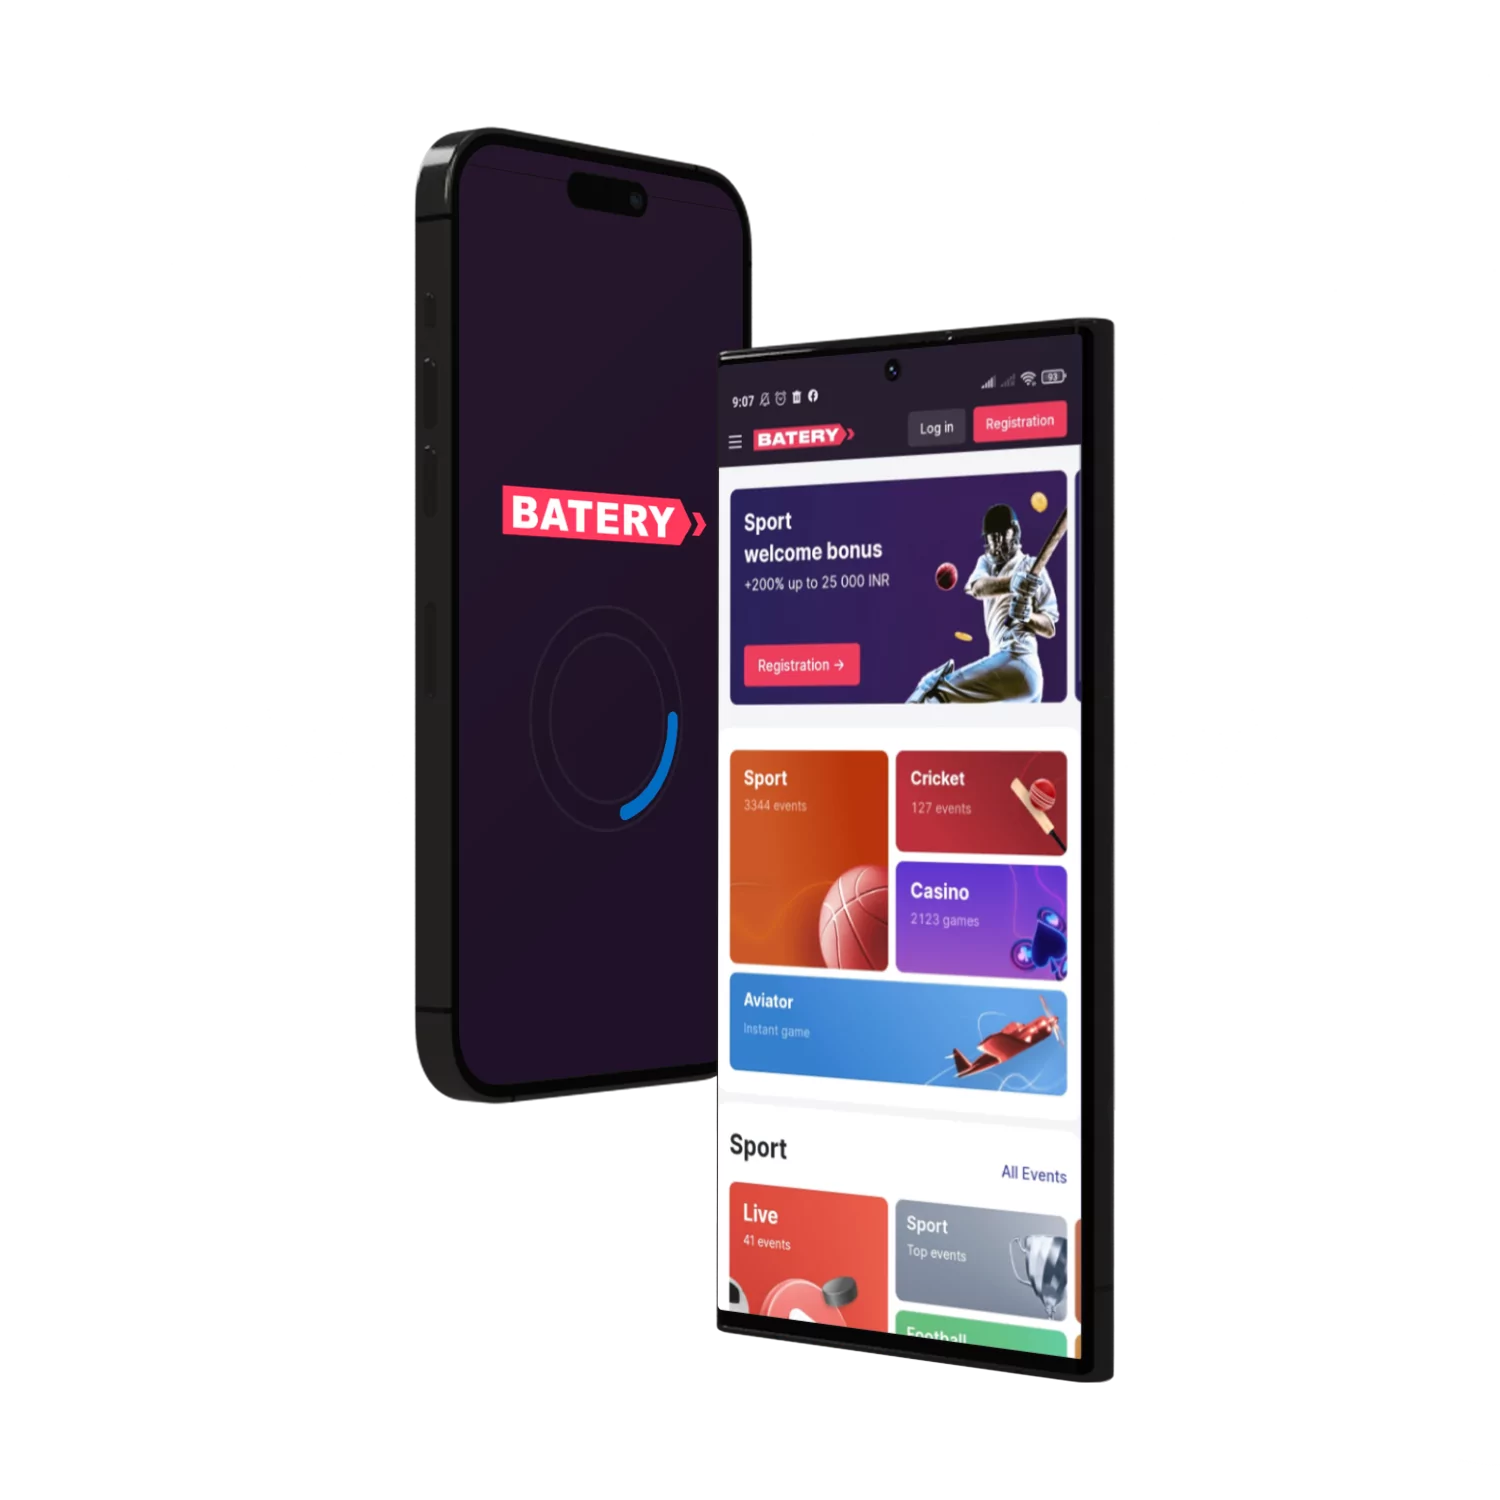 Learn how to place bets on cricket in the Batery app.